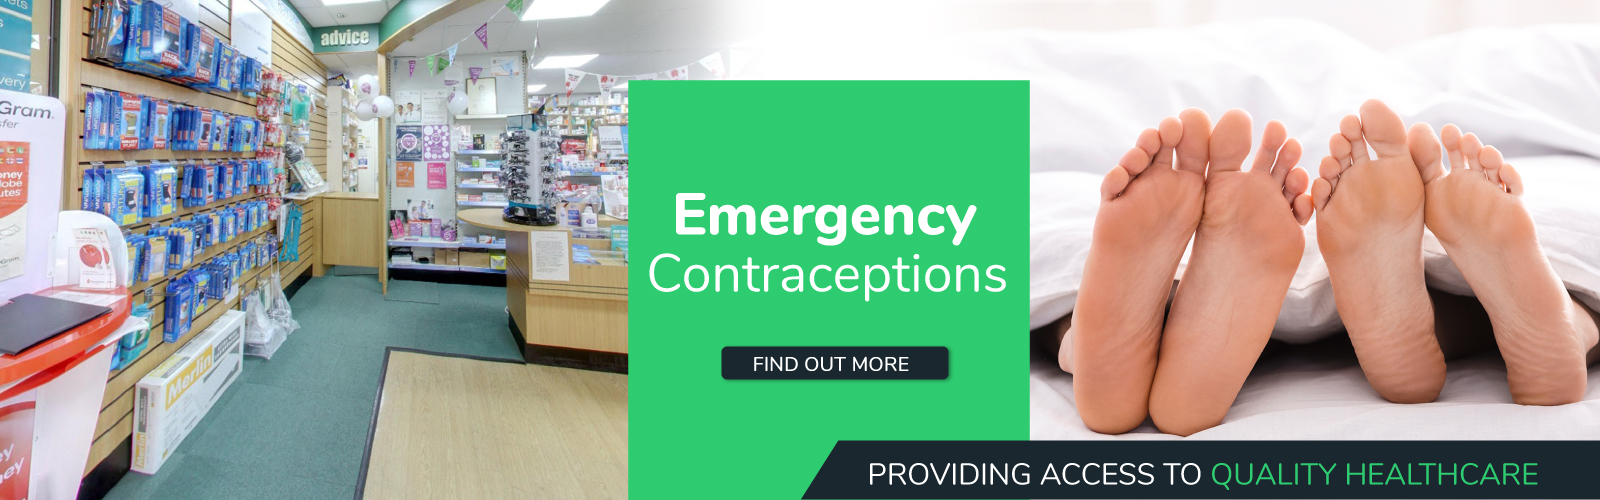 Emergency Contraceptive